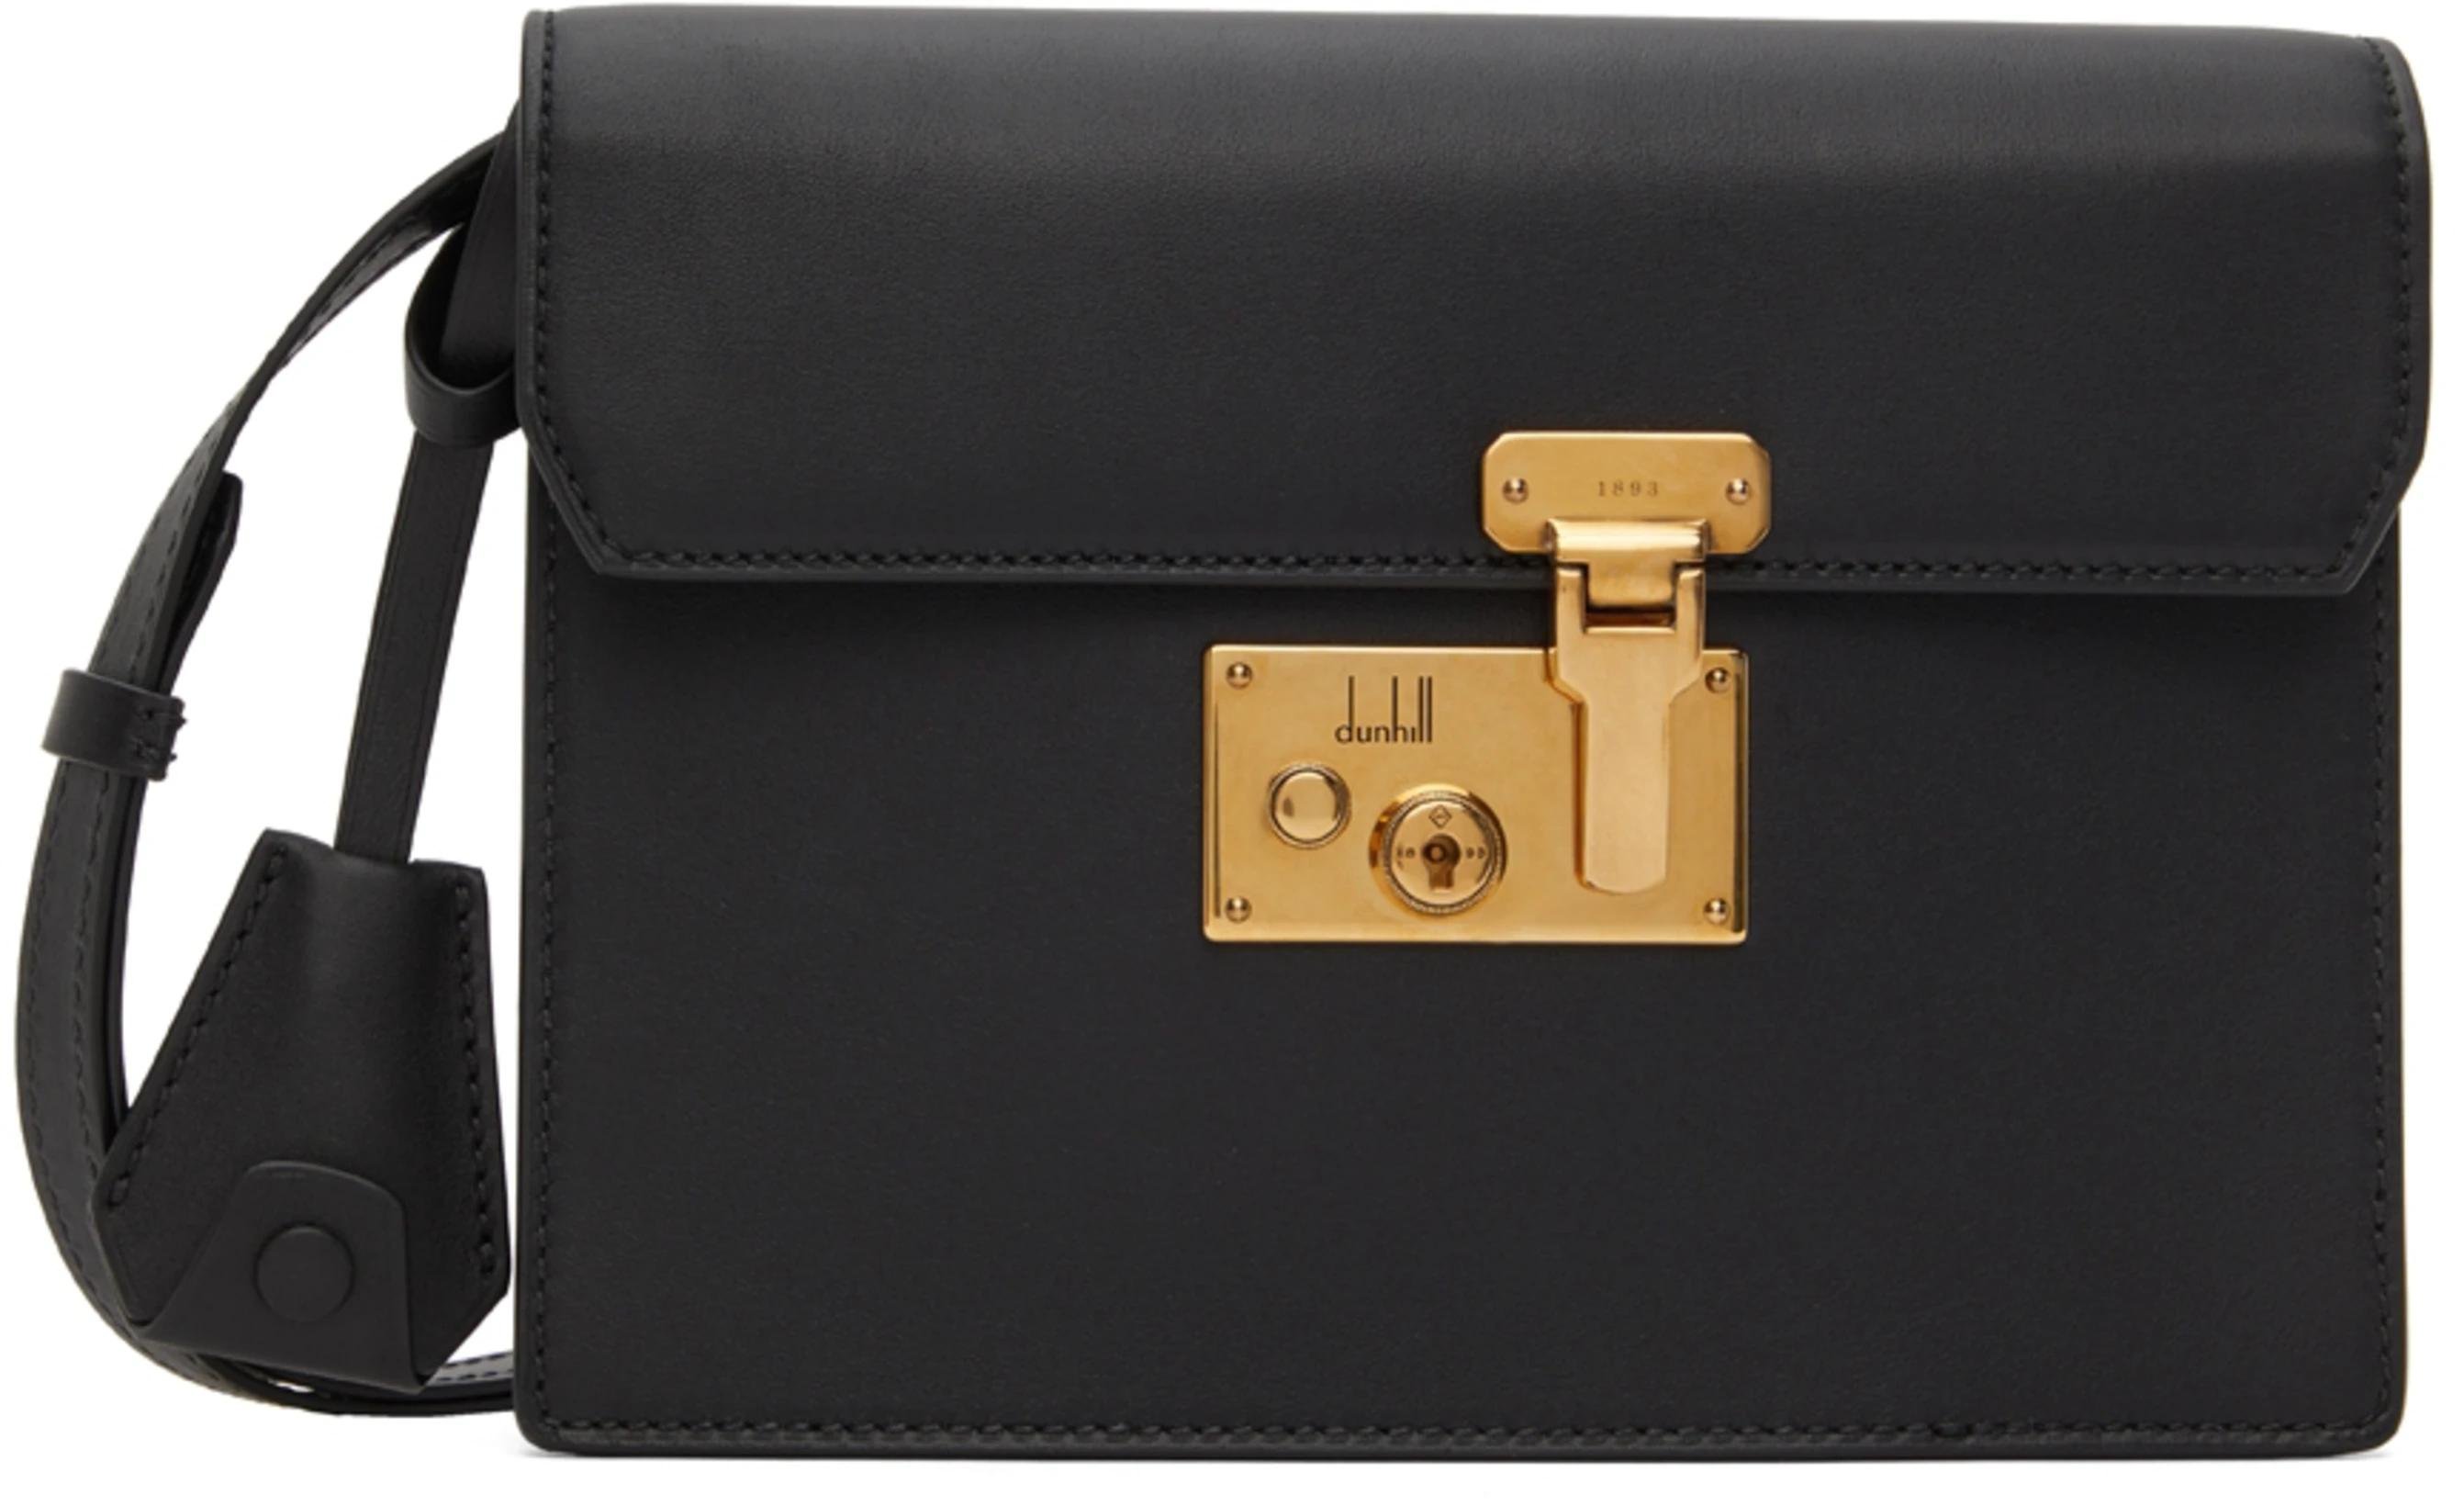 Black Lock Messenger Bag by DUNHILL | jellibeans